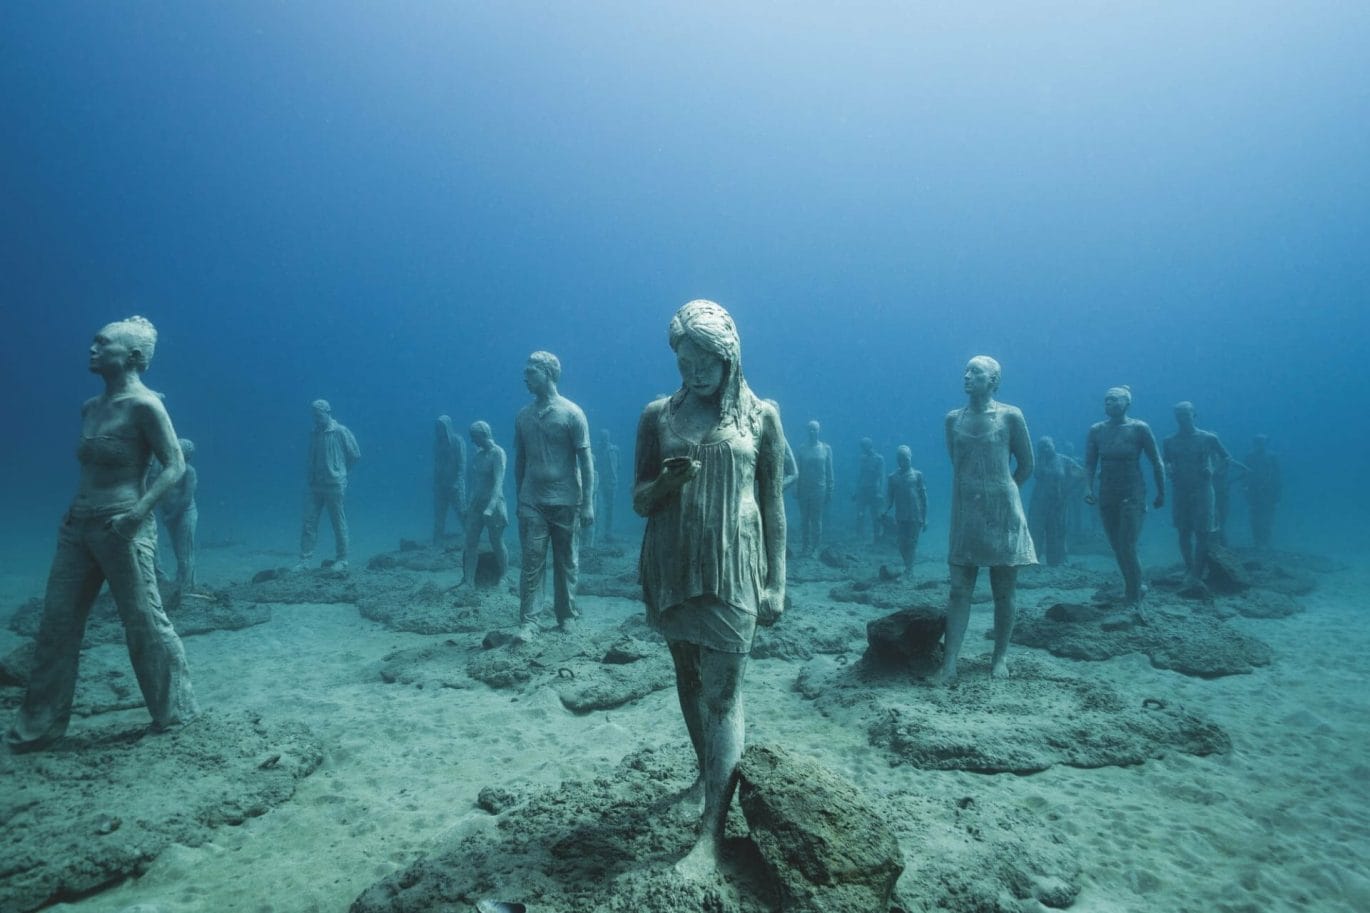 Jason deCaires Taylor, “Rubicon” (2016), stainless steel, pH-neutral cement, basalt and aggregates, installation view, Museo Atlántico, Las Coloradas, Lanzarote, Atlantic Oceanl. Photo courtesy of the artist